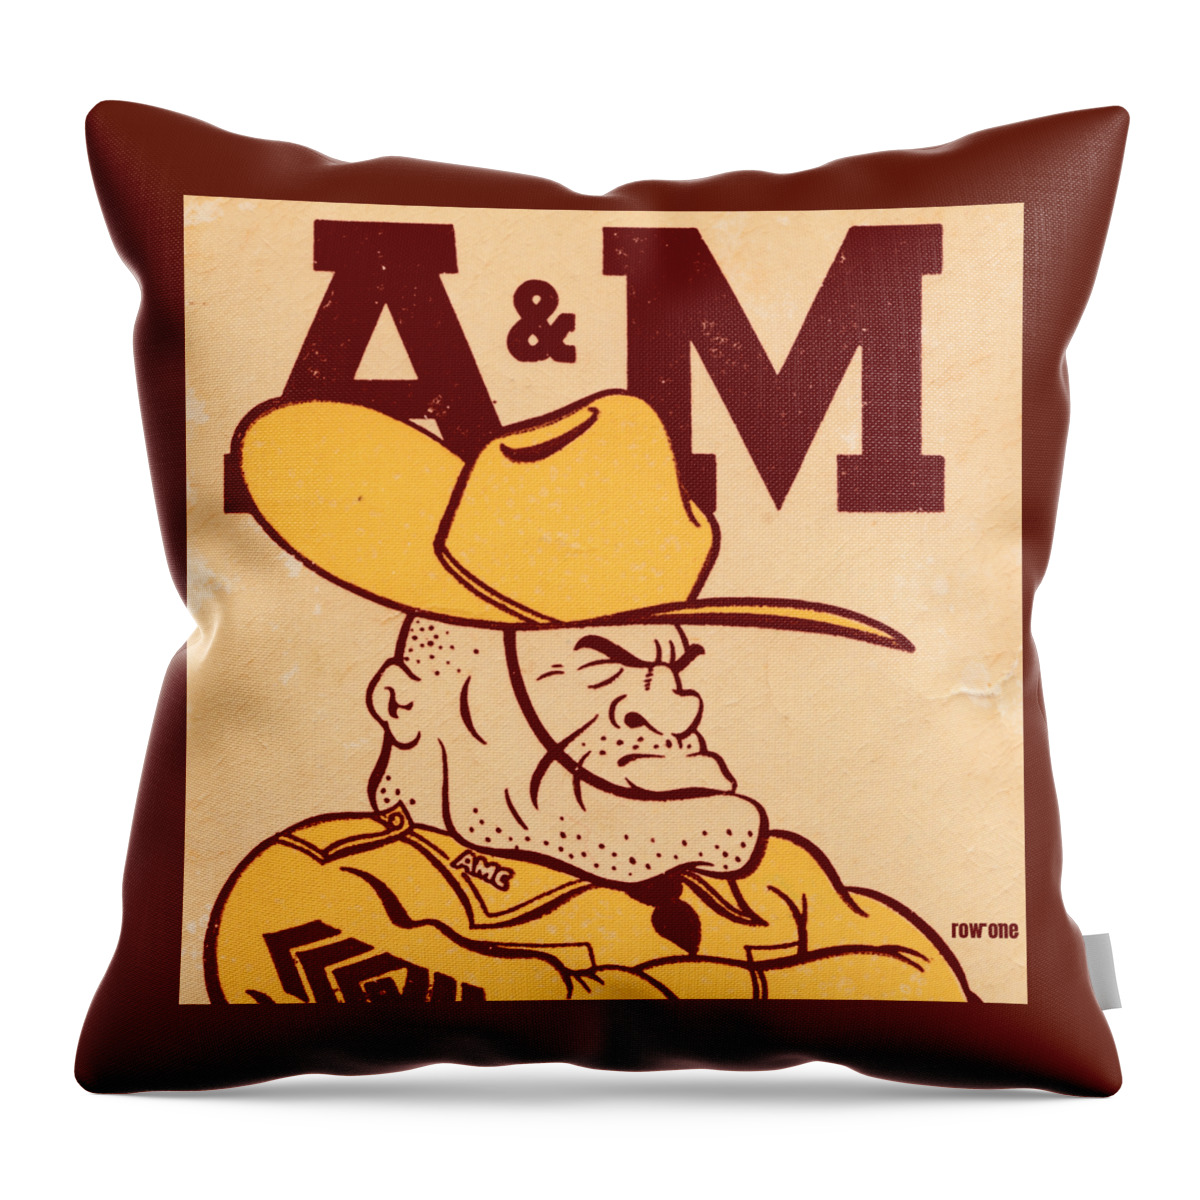 Texas A&m Throw Pillow featuring the mixed media 1957 Ol' Sarge by Row One Brand